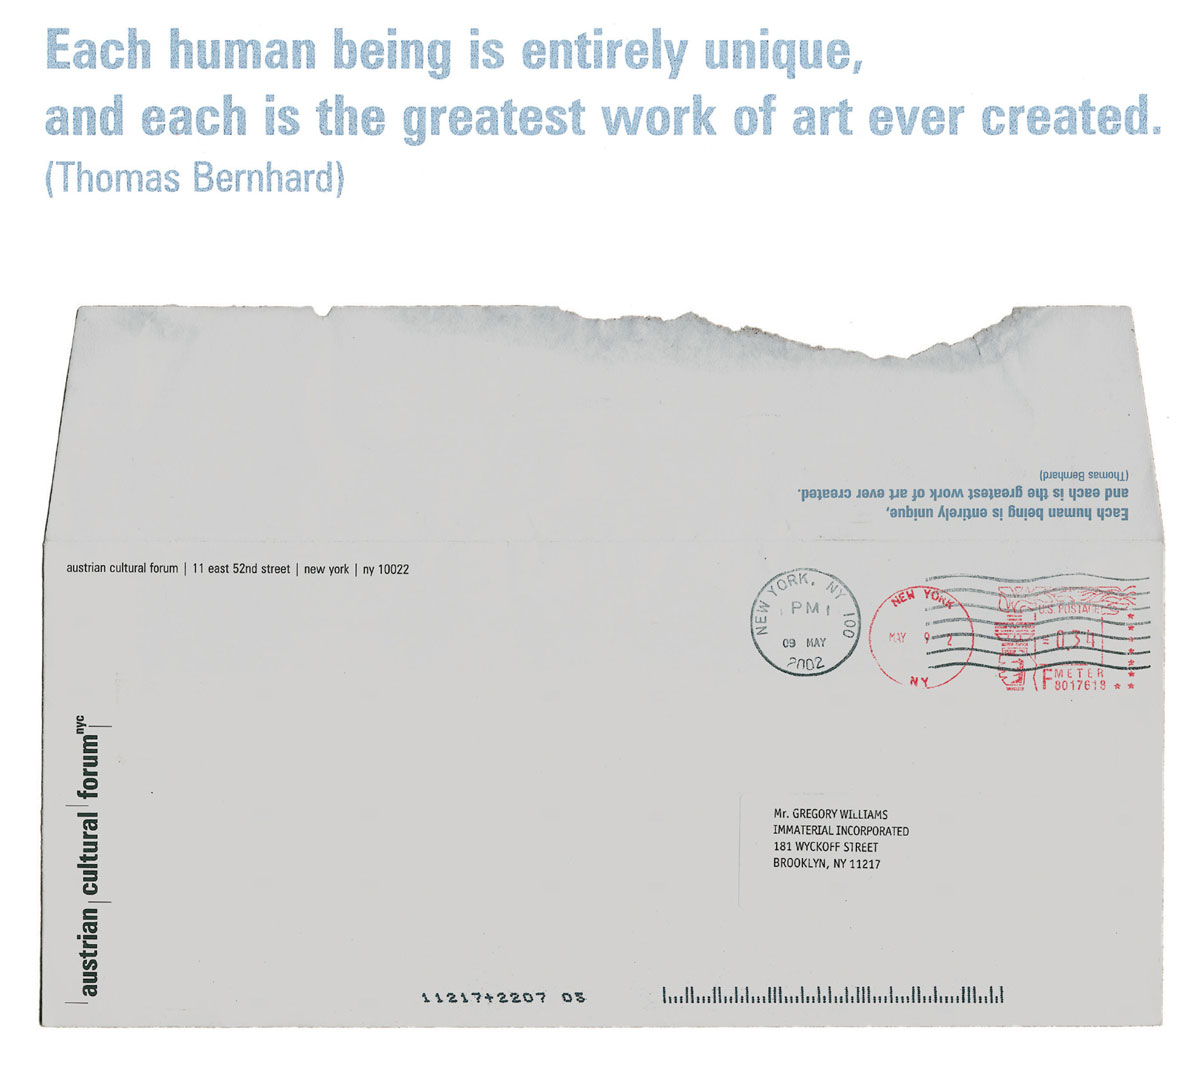 An Austrian Cultural Forum envelope with the Thomas Bernhard quote “Each human being is unique, and each is the greatest work of art ever created” on the flap.